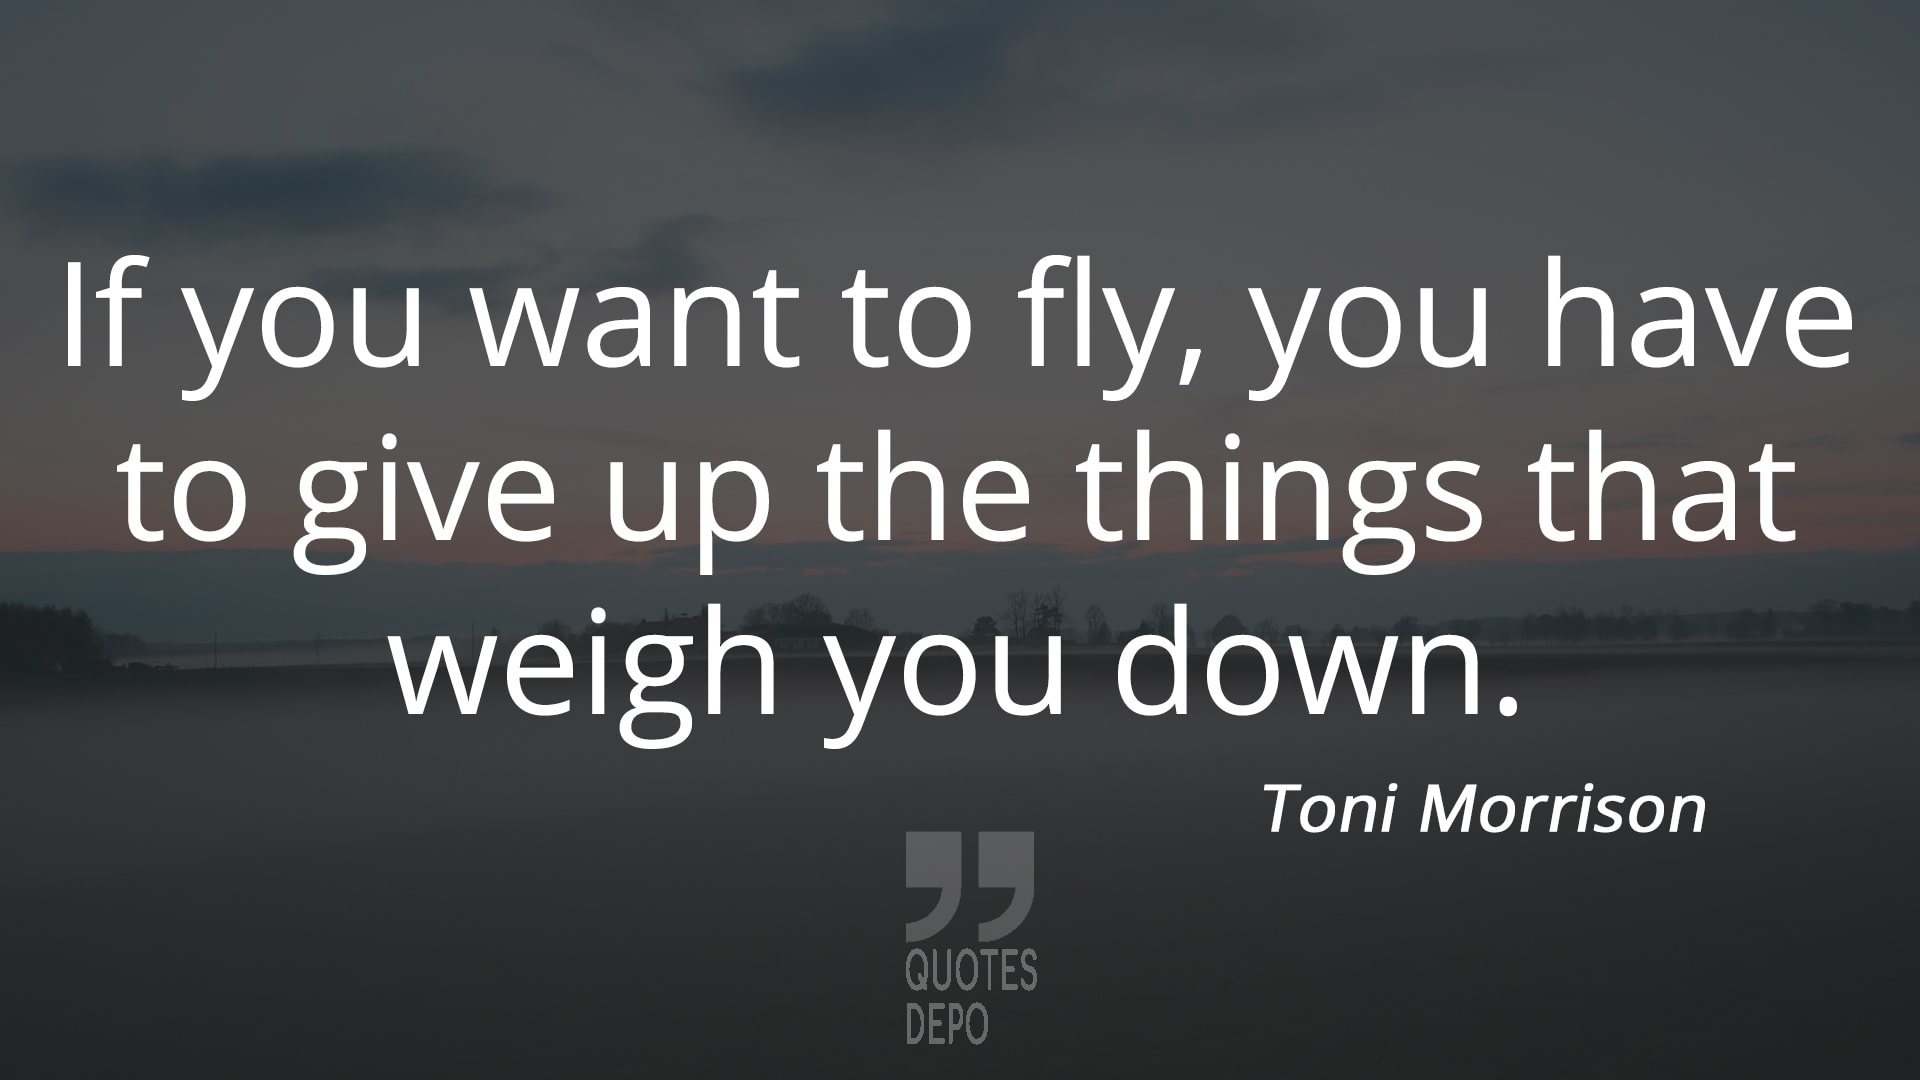 if you want to fly you have to give up the things that weigh you down - toni morrison quotes